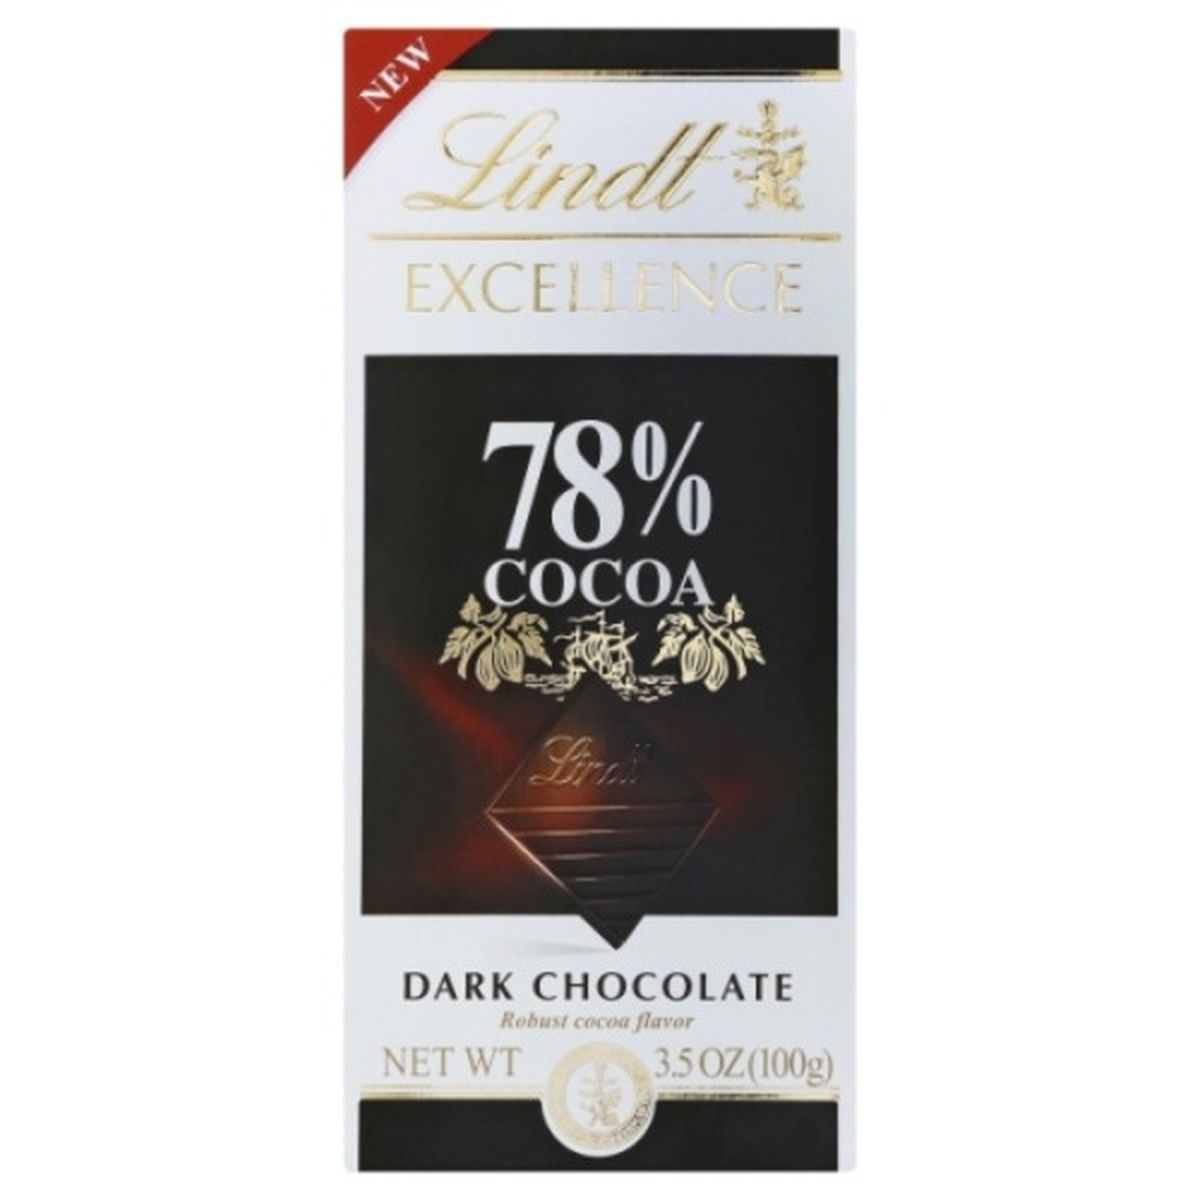 Calories in Lindt Excellence Dark Chocolate, 78% Cocoa